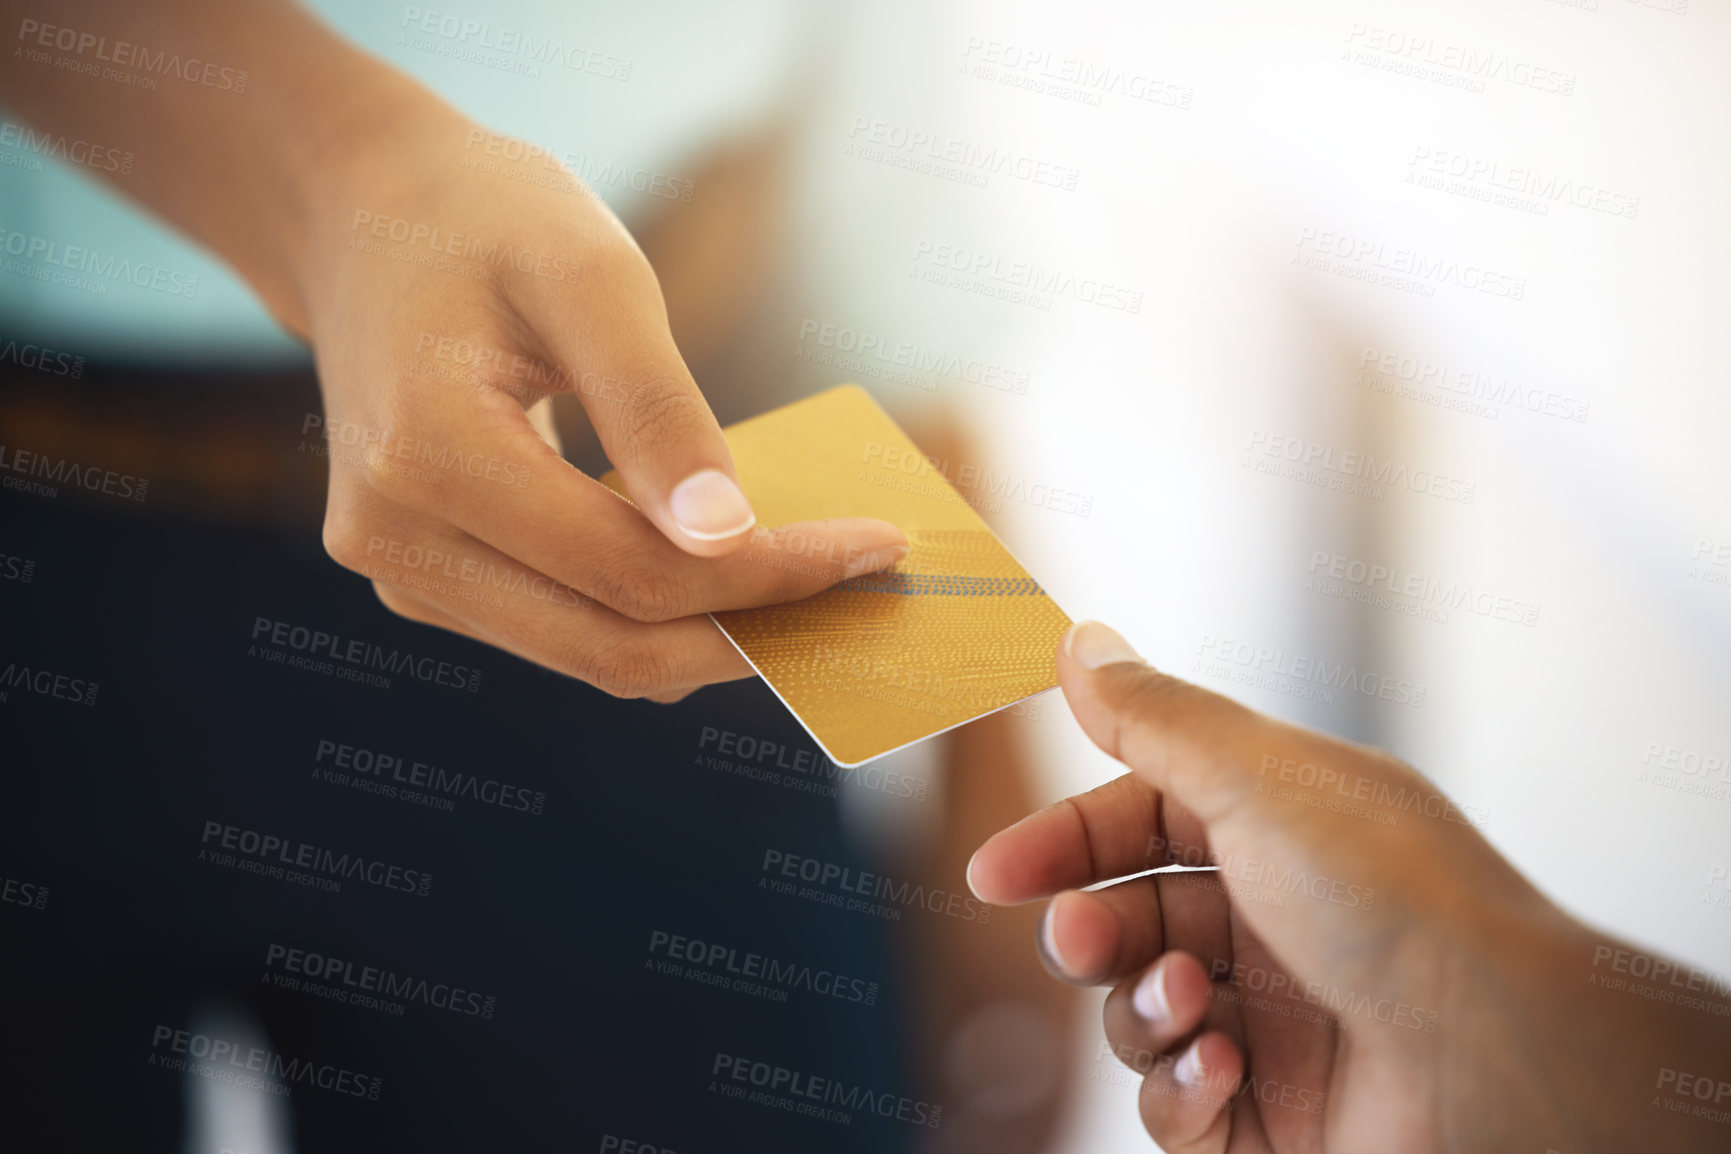 Buy stock photo Cropped shot of an unrecognizable person giving someone a credit card